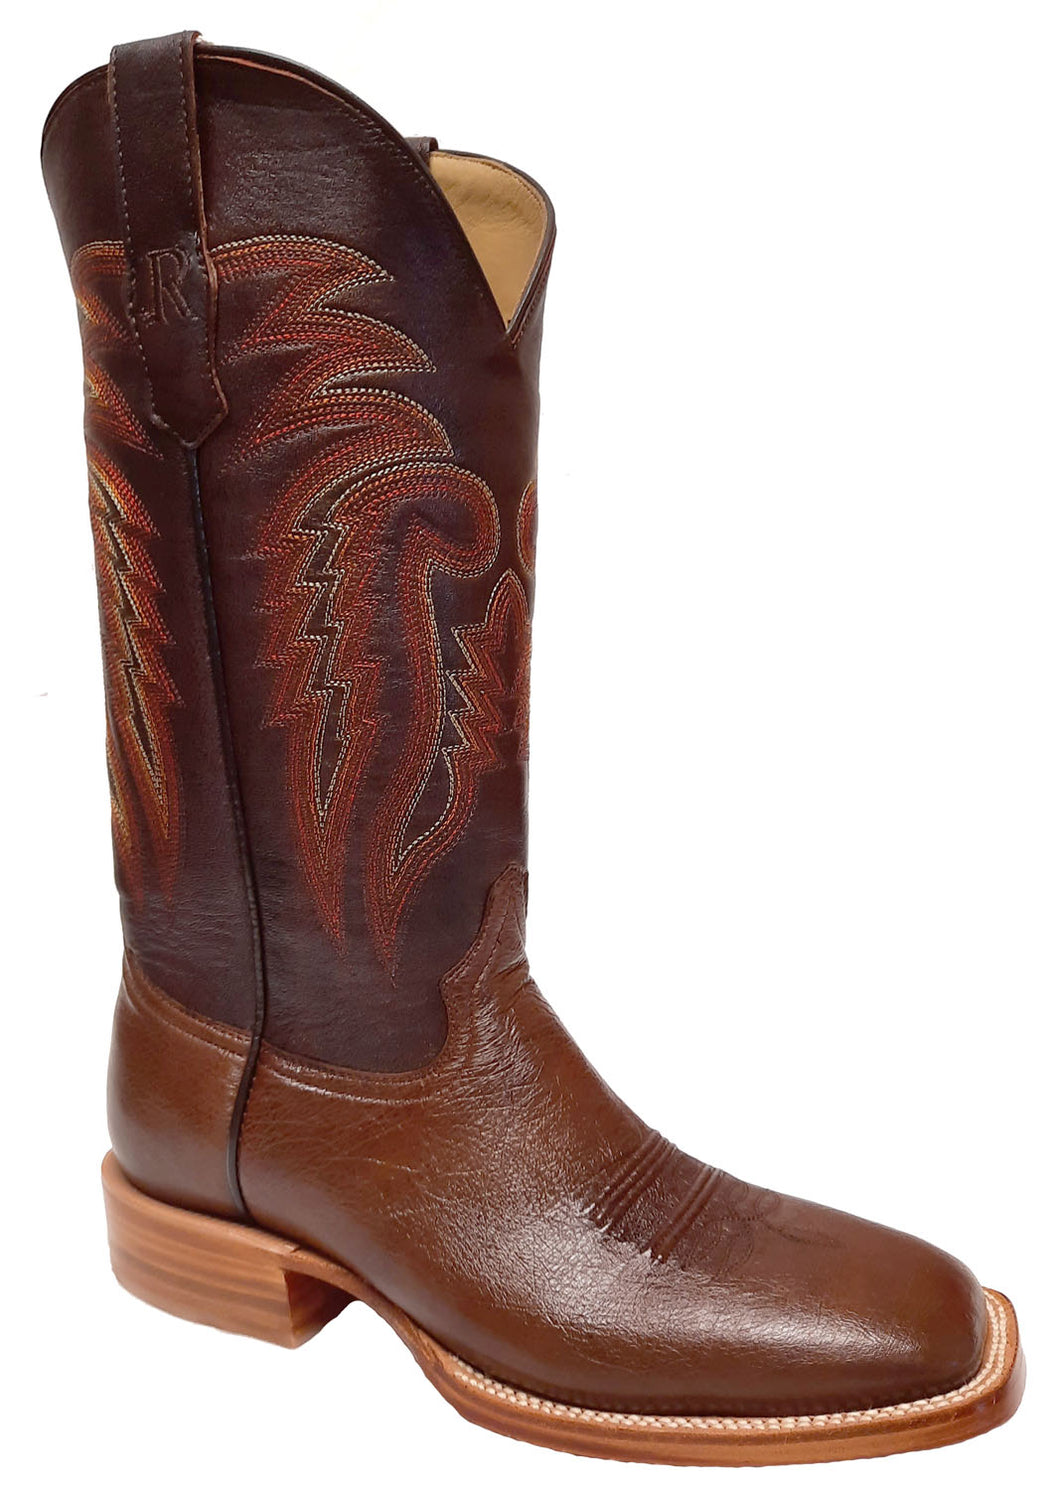 Pard's Western Shop Kango Tobac Smooth Ostrich Boots for Men from R.Watson Boots